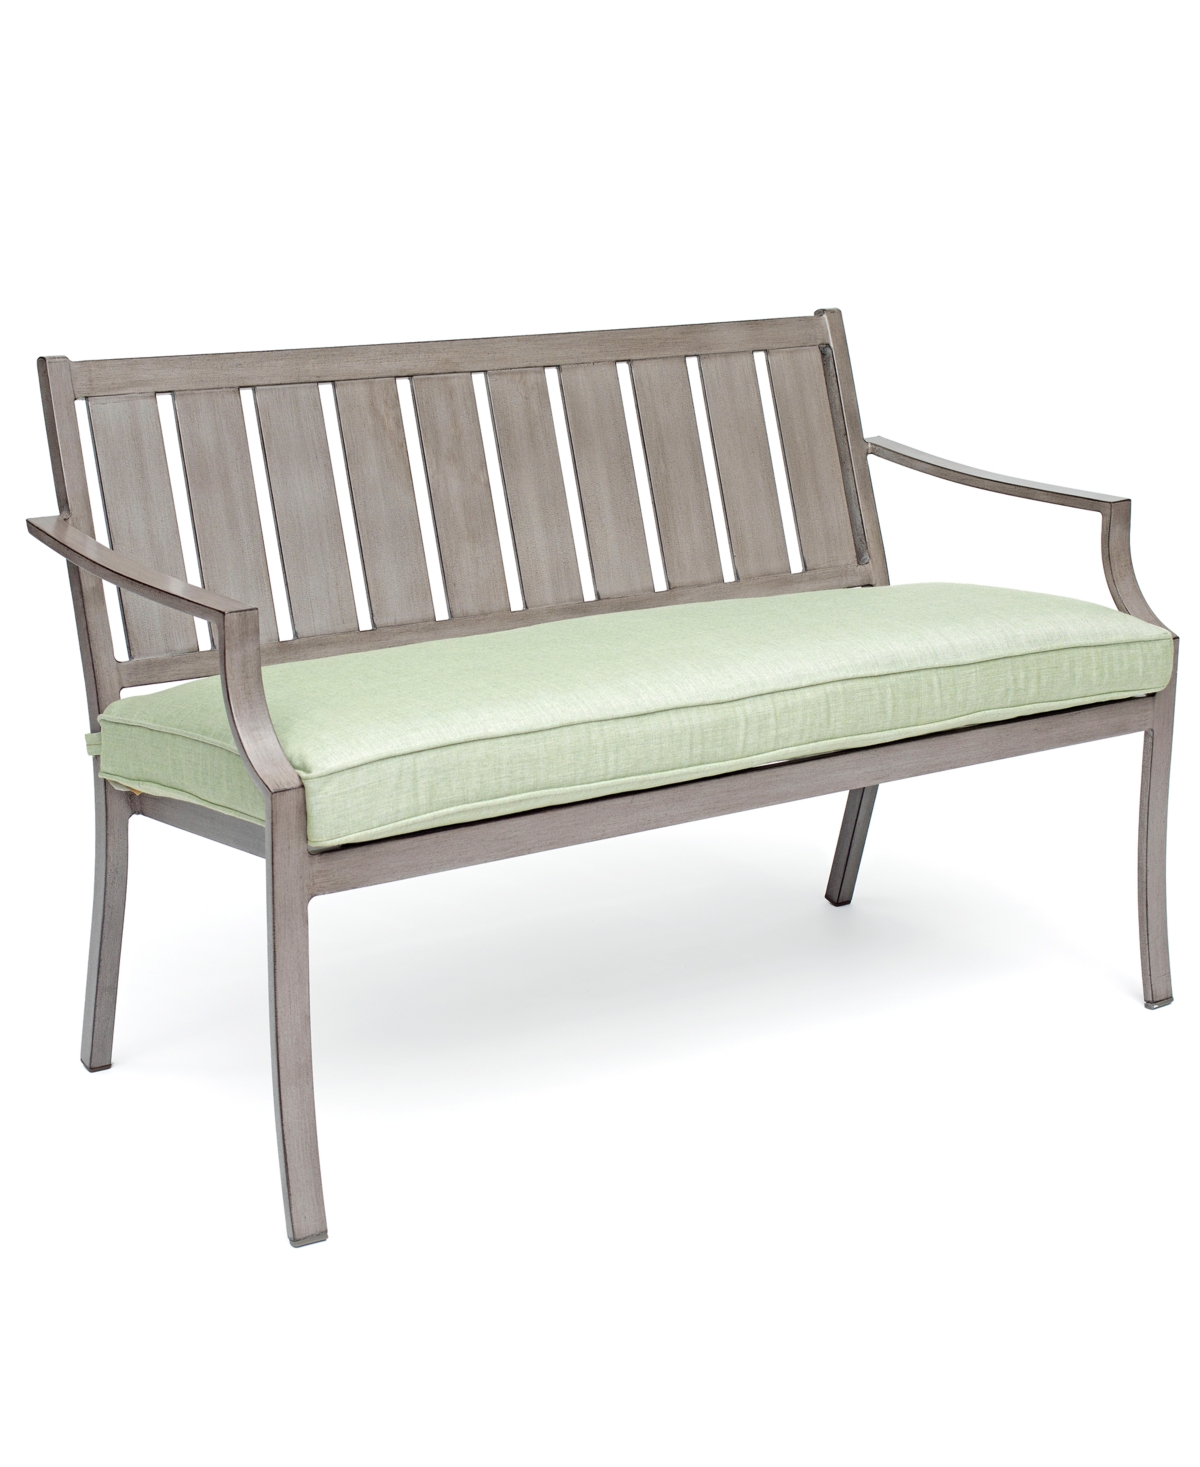 AGIO CLOSEOUT! WAYLAND OUTDOOR BENCH WITH SUNBRELLA CUSHIONS, CREATED FOR MACY'S